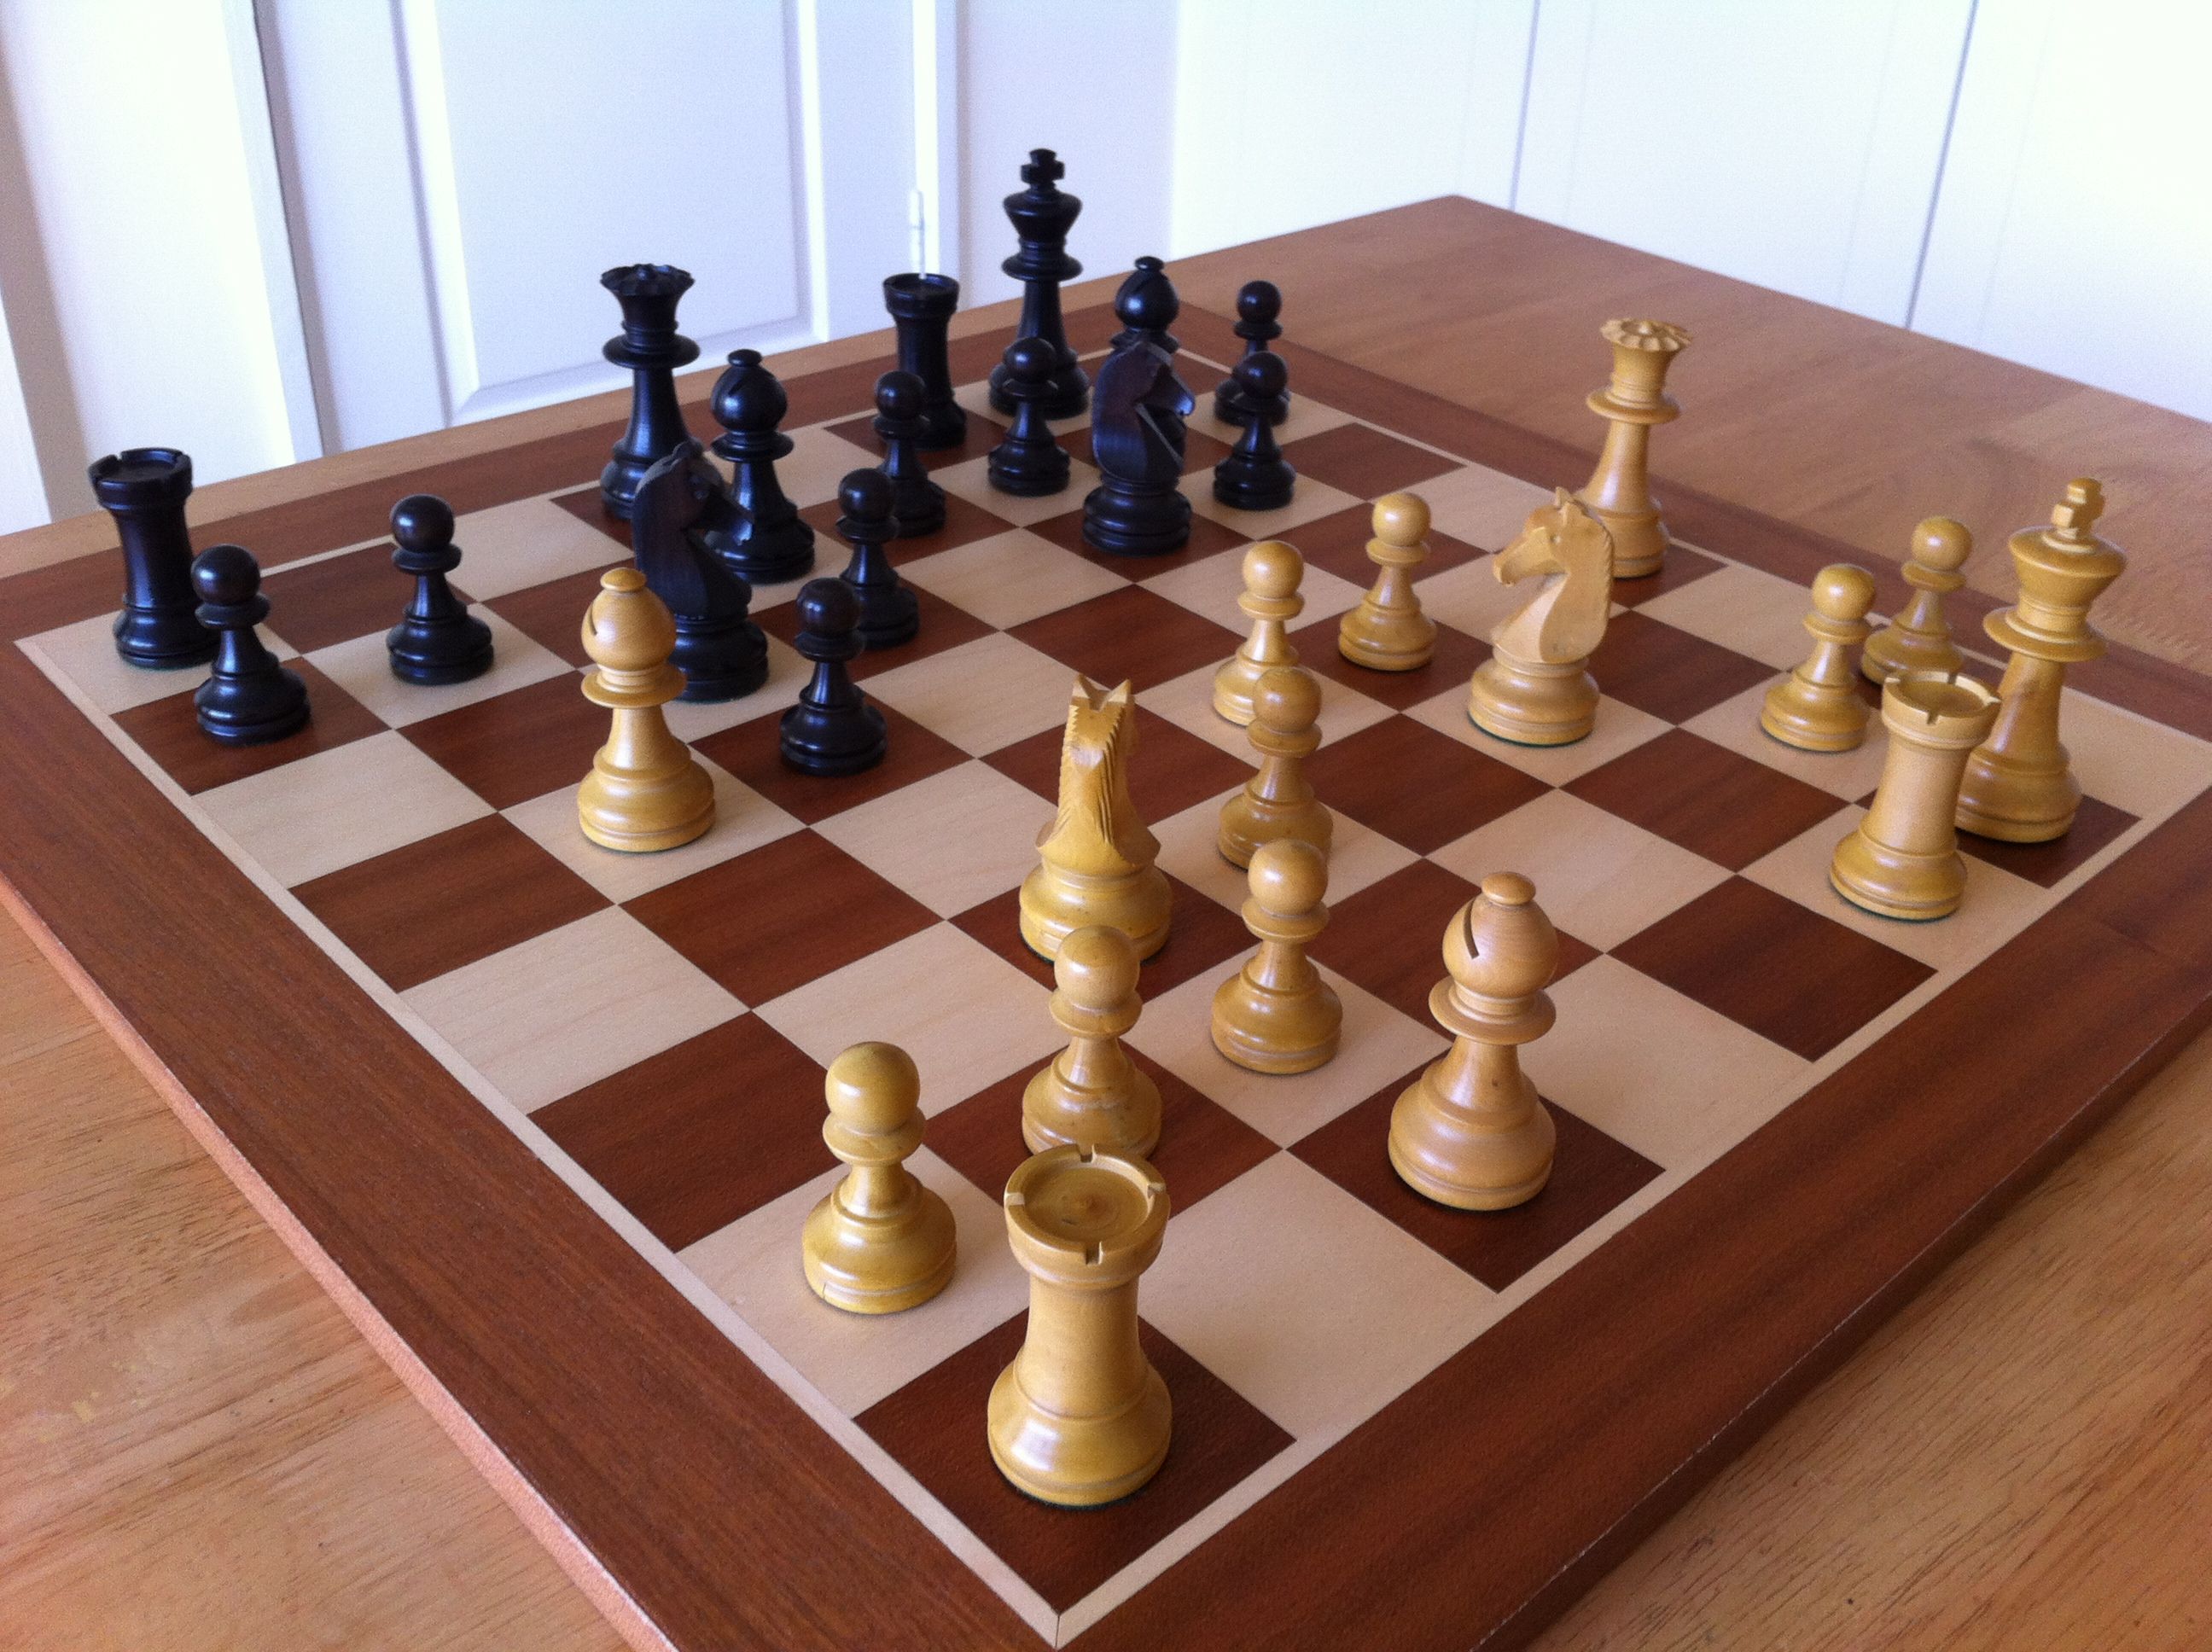 Help with staining chess pieces - Chess Forums - Chess.com